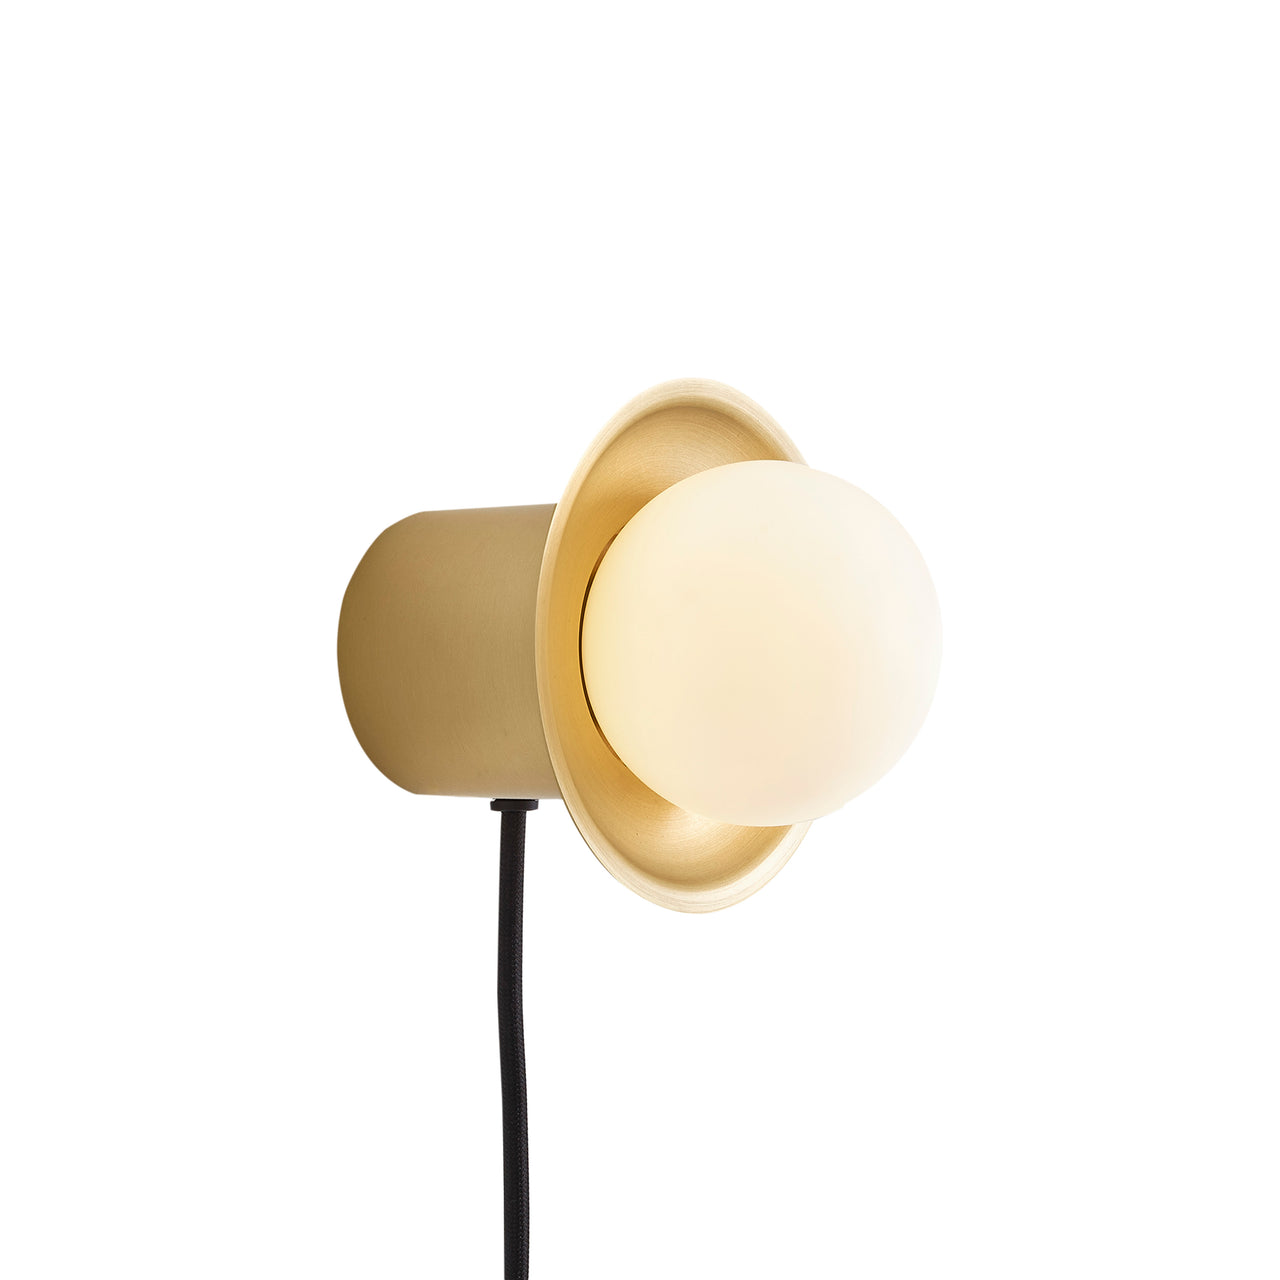 Janed Wall Light with Cable: Satin Brass + Satin Brass